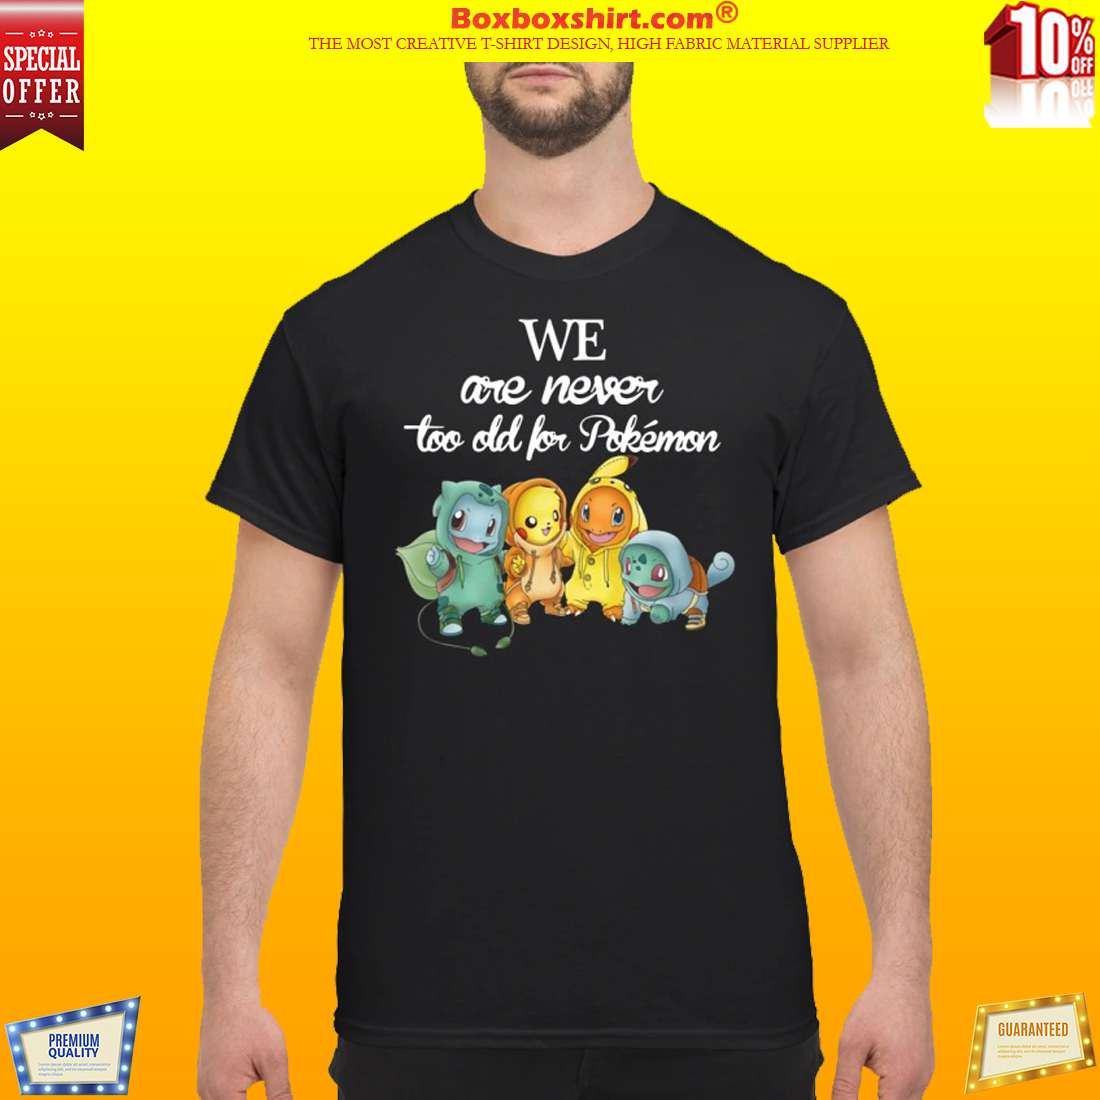 We are never too old shirt for Pokemon classic shirt